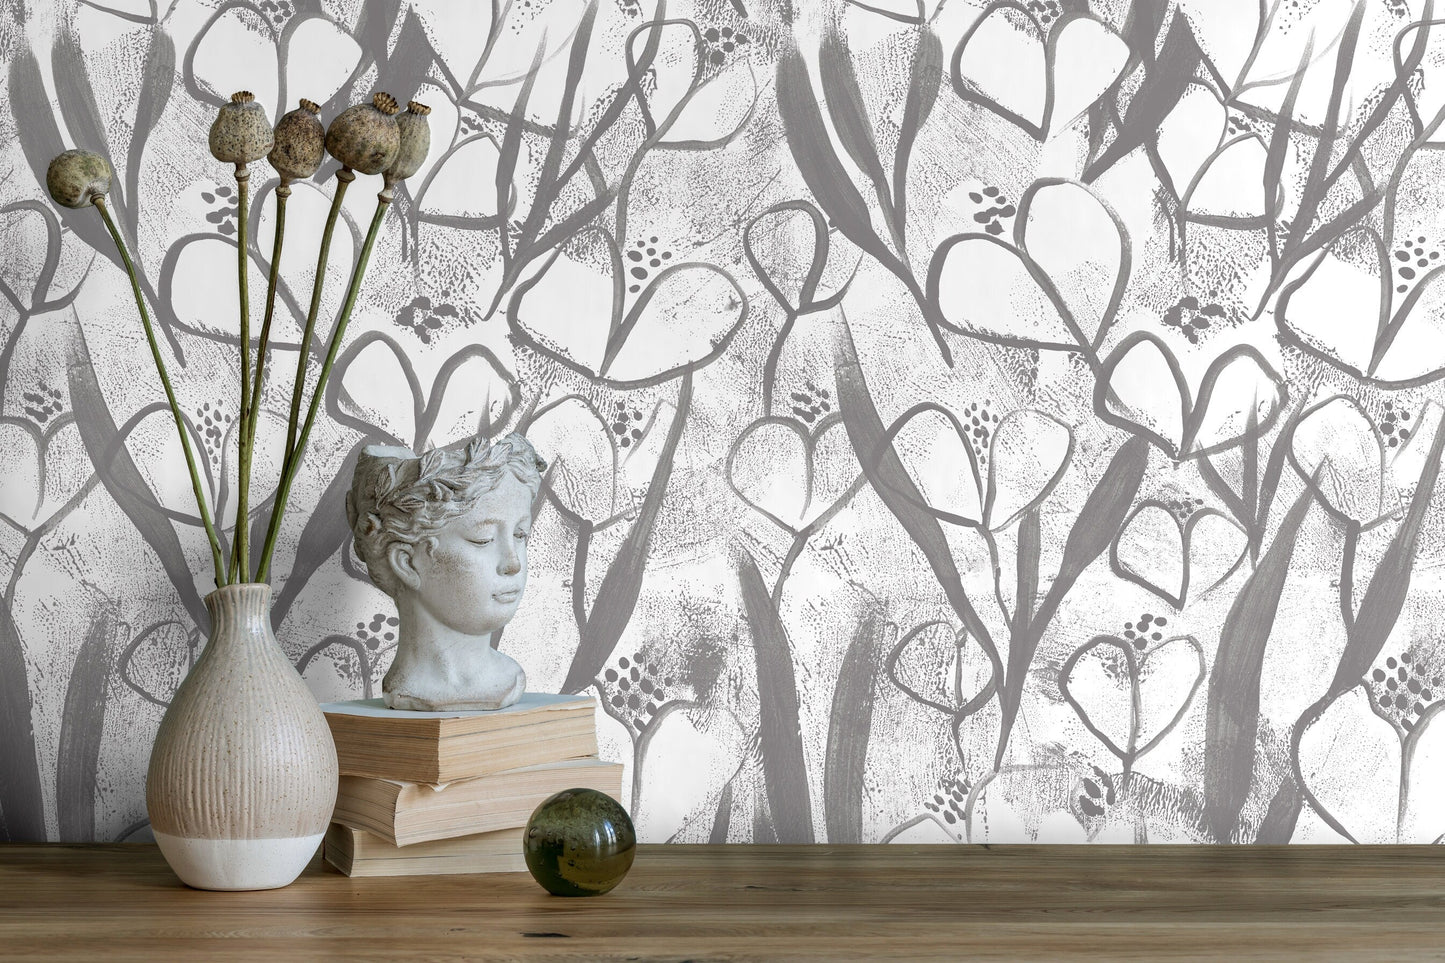 Wallpaper Peel and Stick Wallpaper Removable Wallpaper Home Decor Wall Art Wall Decor Room Decor / Black and White Floral Wallpaper - X191